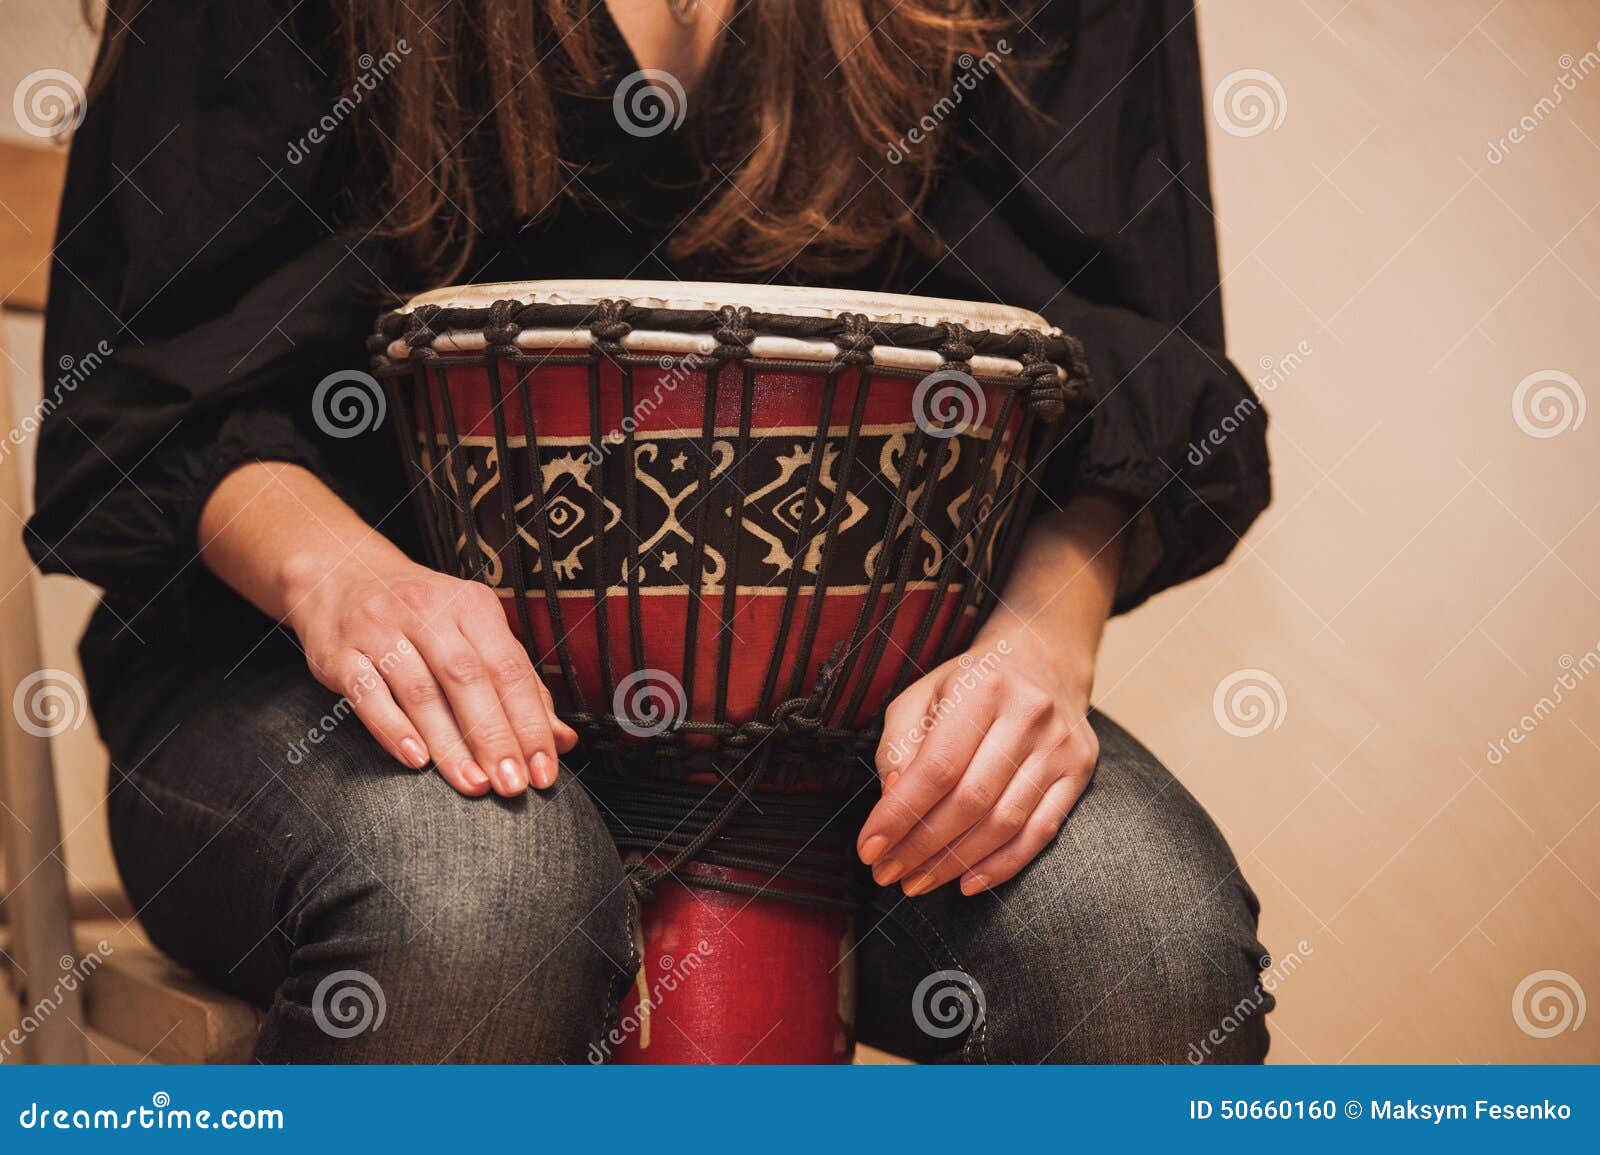 person playing on jambe drum no face